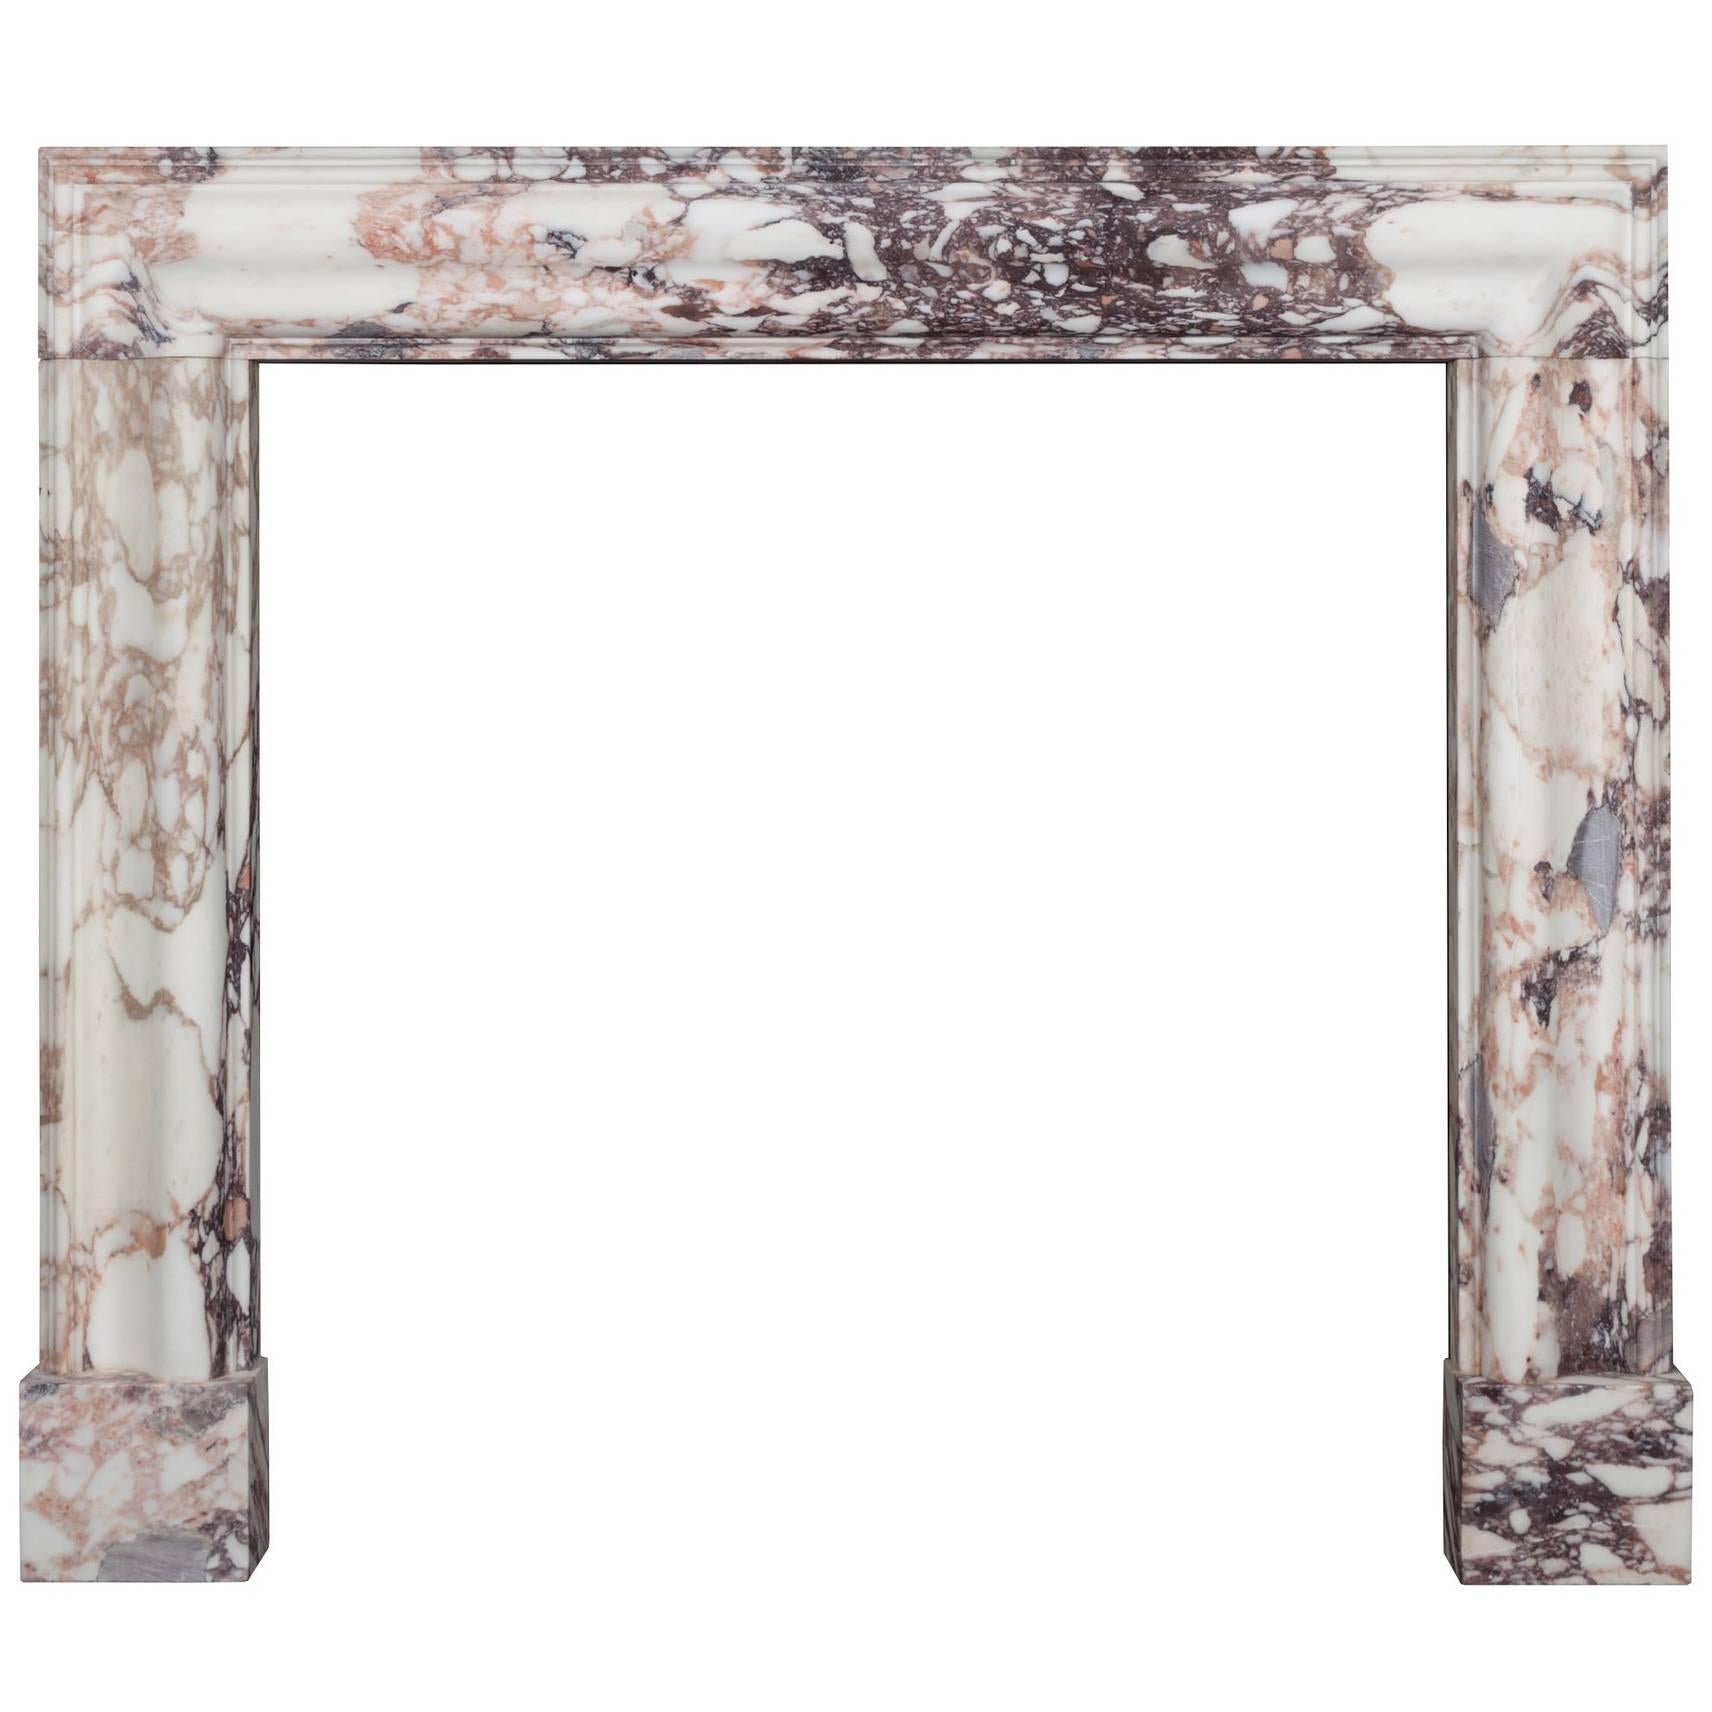 Breccia Medici Marble Bolection Fireplace by Ryan & Smith